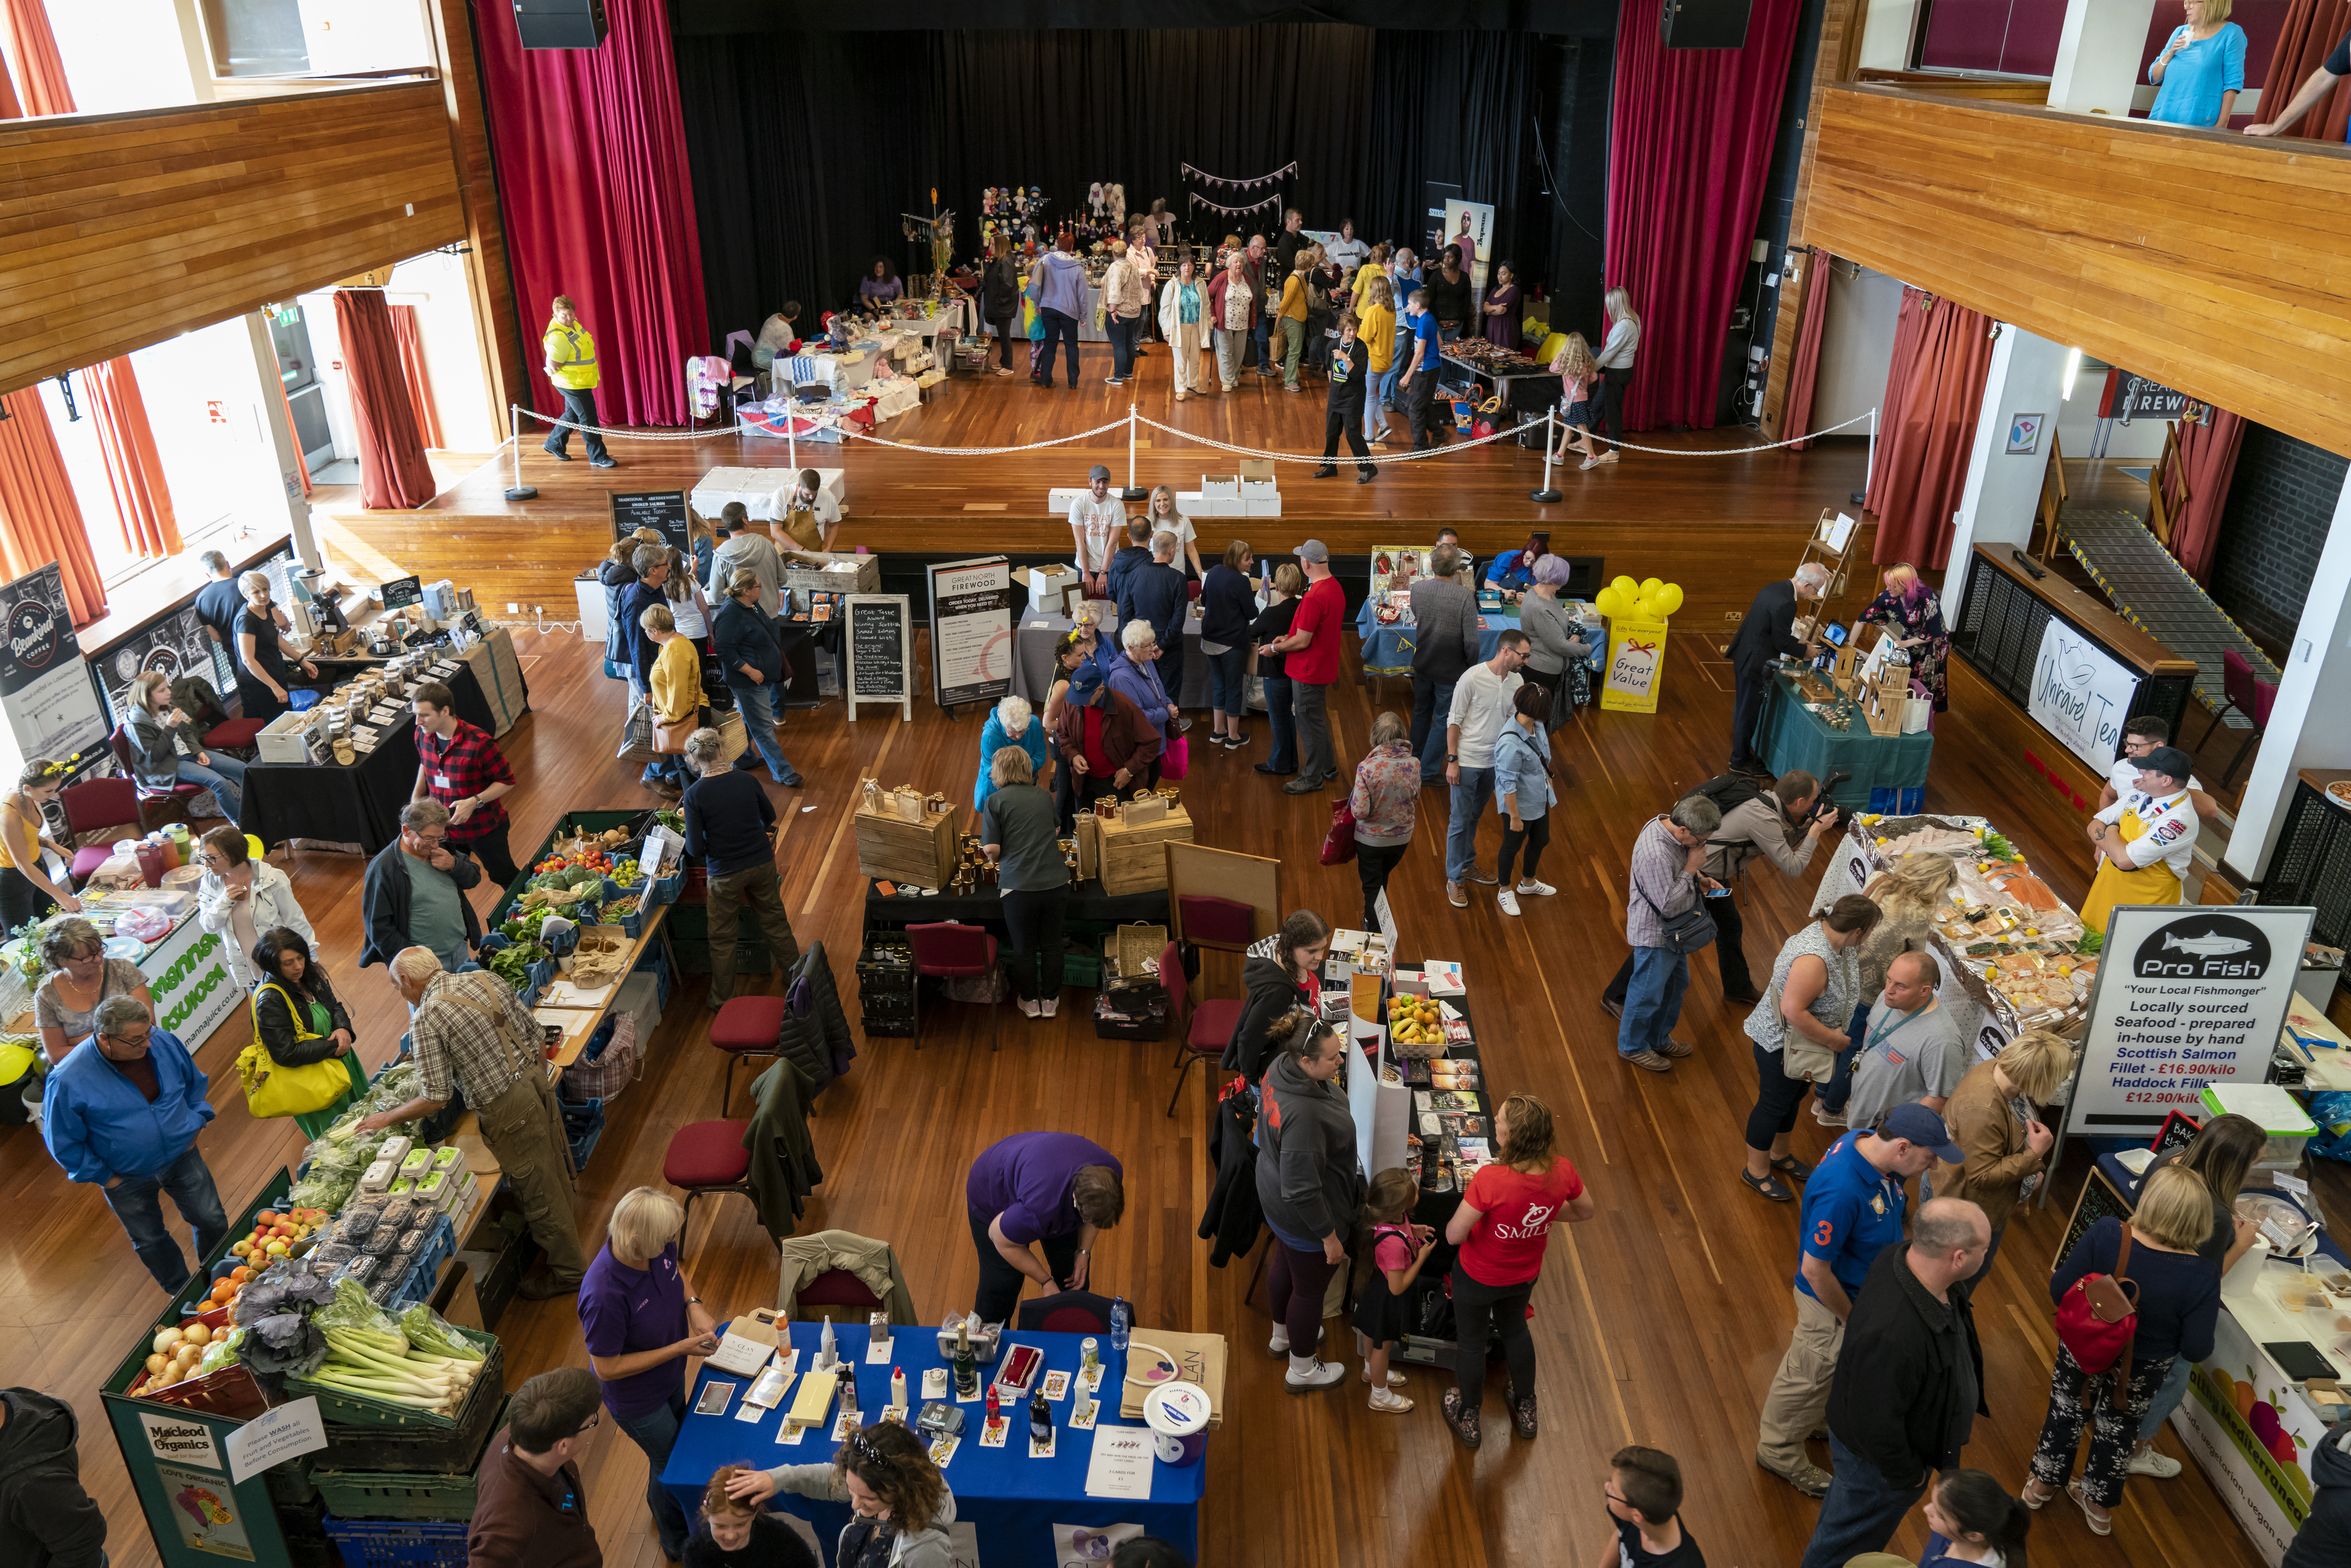 The Elgin Food and Drink Festival 2018 in Elgin, Moray, Scotland on Saturday 18 August 2018. PICTURE CONTENT:- Overall view of the Hall contents